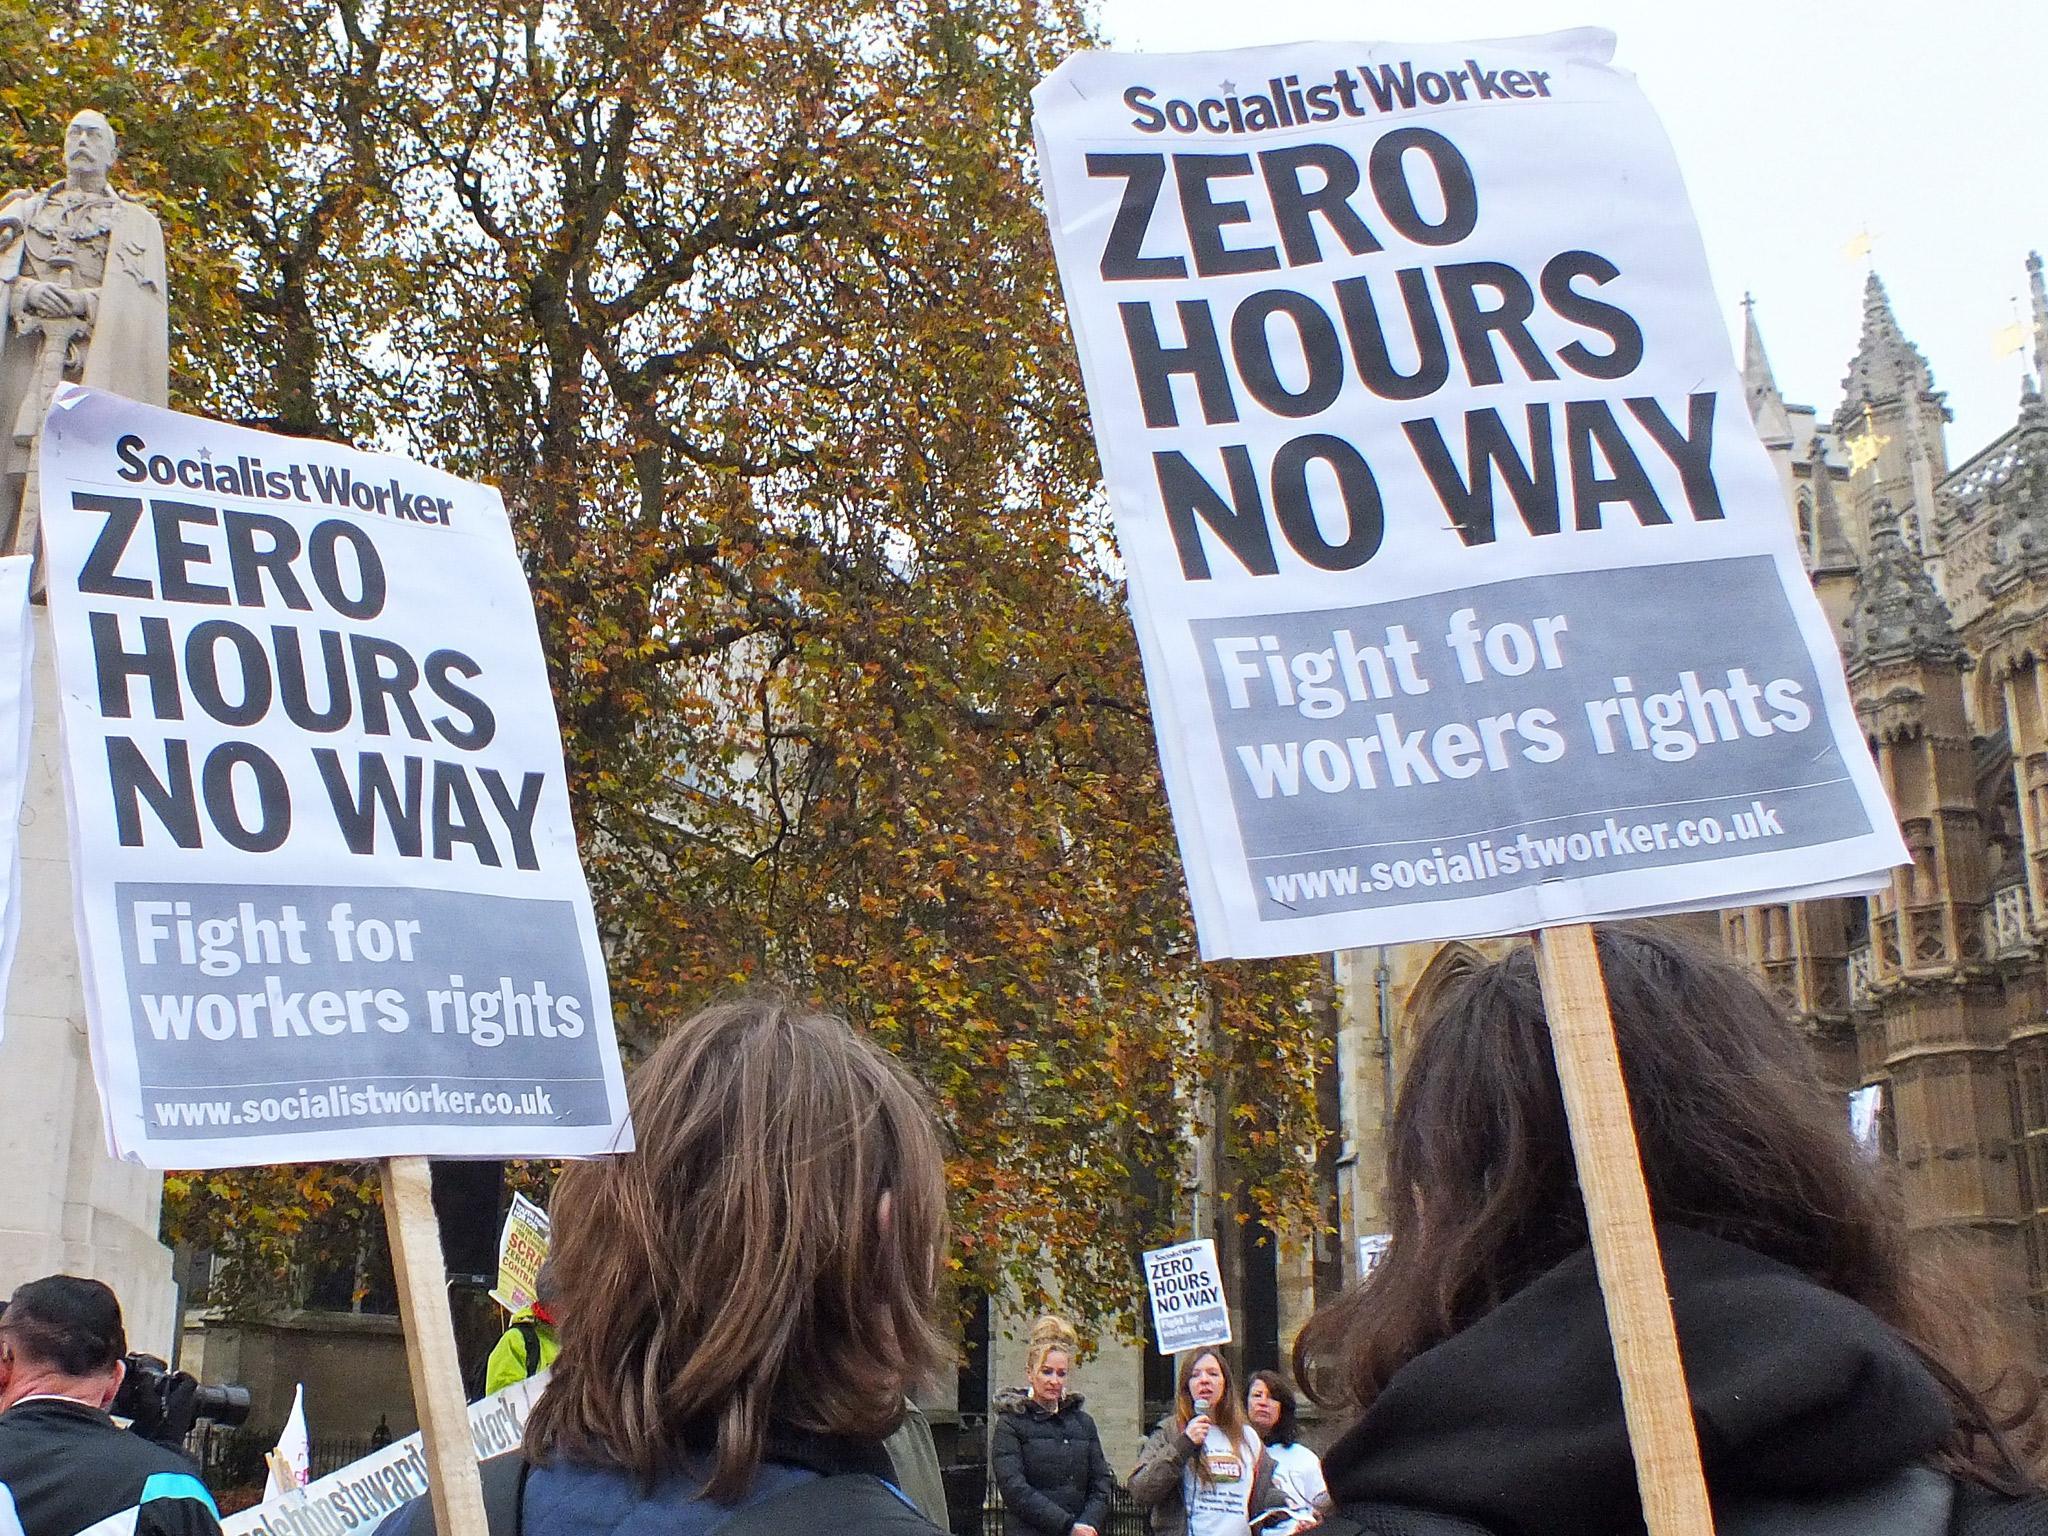 Zero hours contracts are where one party engages another party to perform work and there is no minimum level of work and hours guaranteed